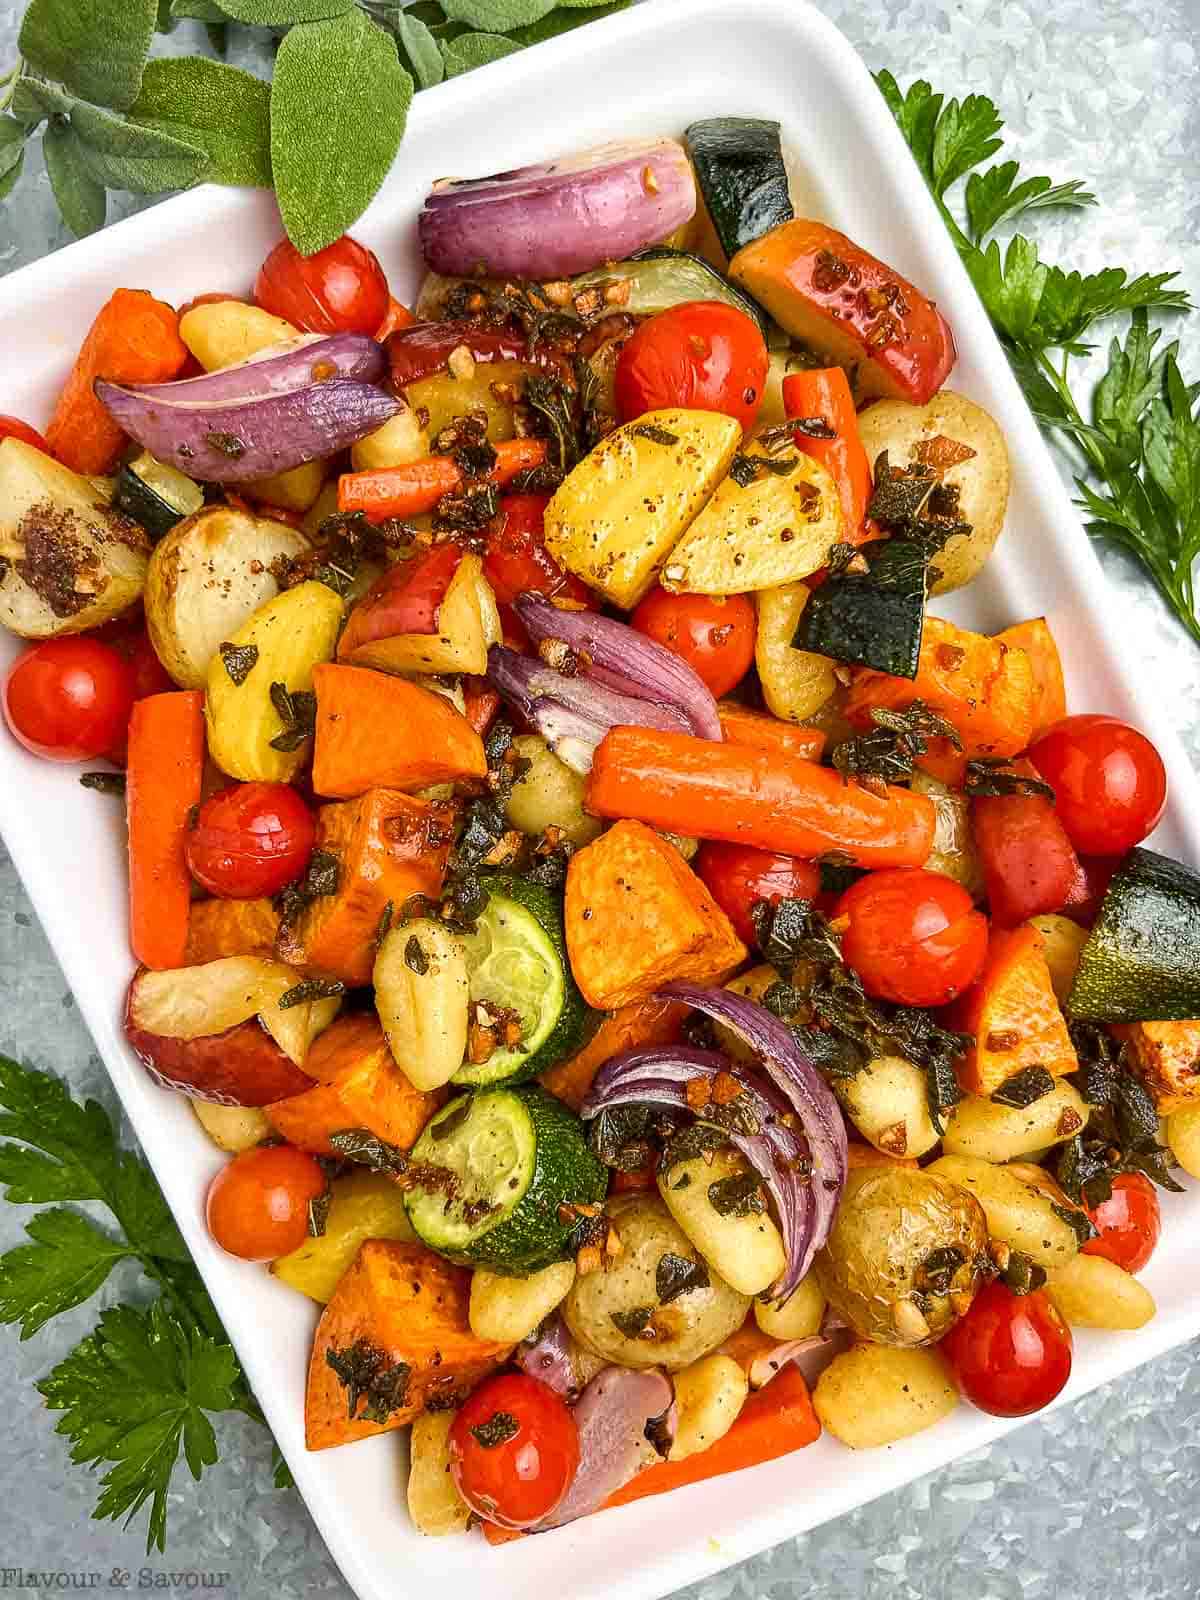 Overhead view of a platter of roasted vegetables with gluten-free gnocchi.